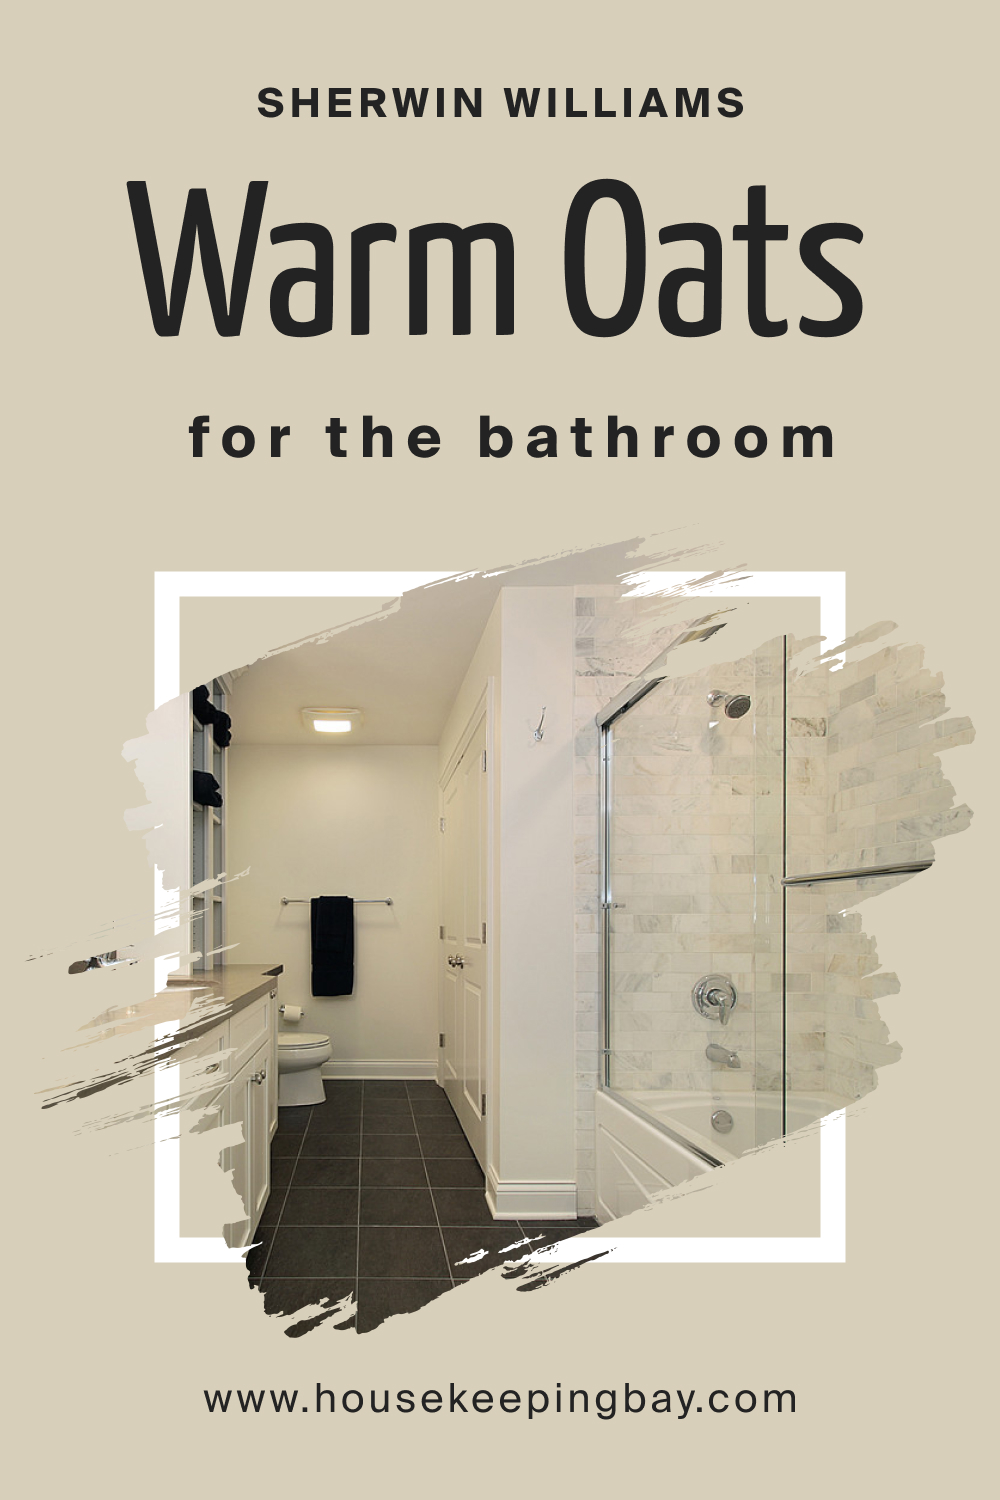 Sherwin Williams. SW 9511 Warm Oats For the Bathroom